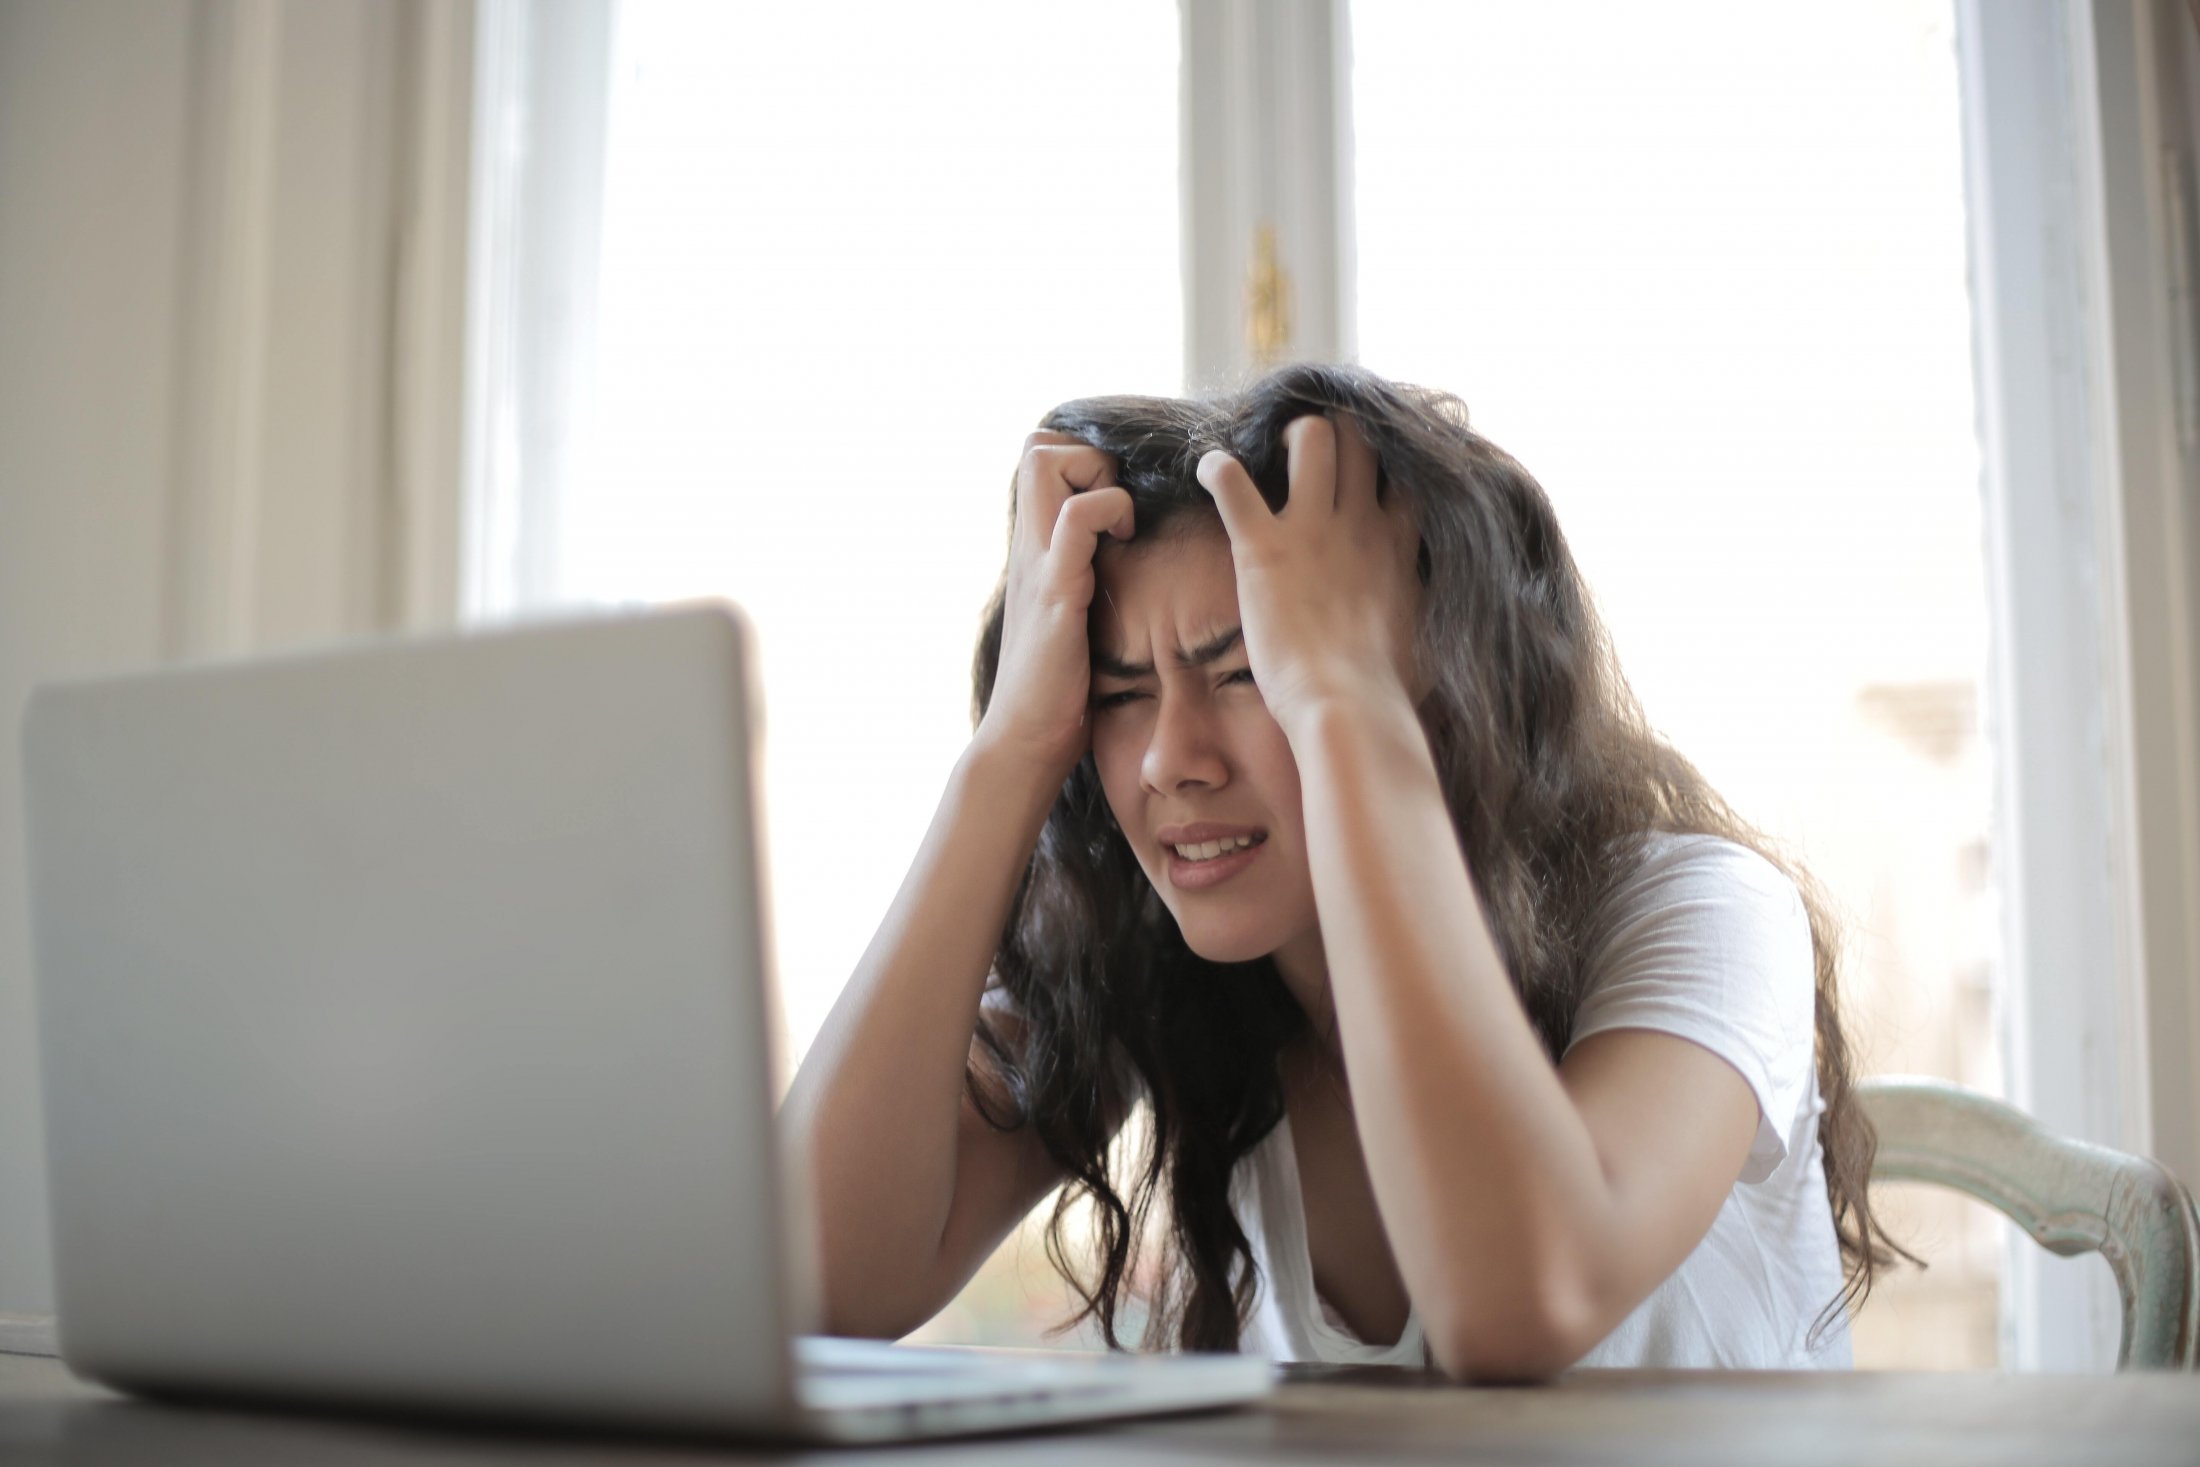 Woman at laptop looking confused and frustrated with Internet Explorer